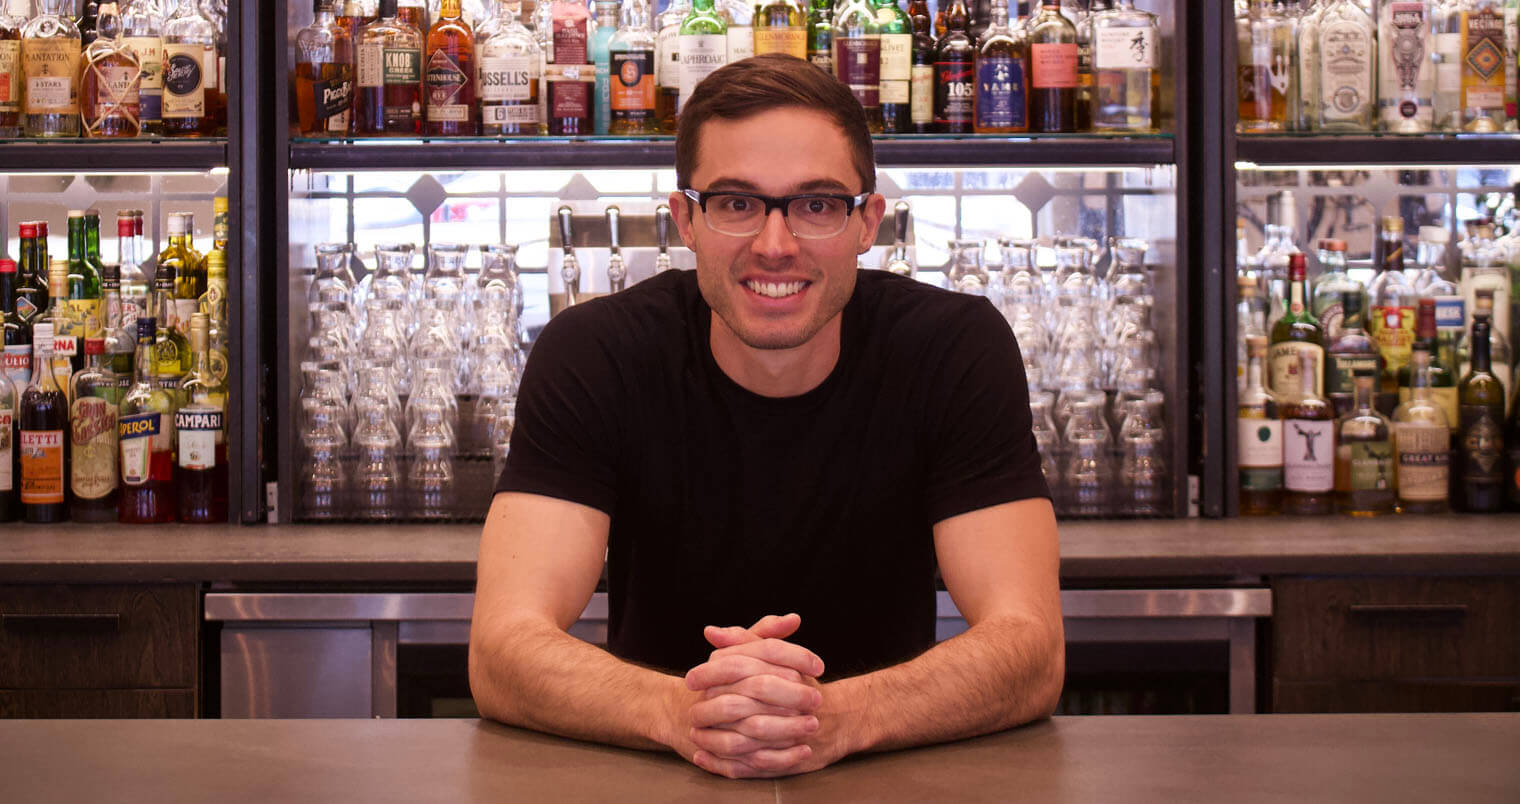 Mark Phelan of Revival Cafe-Bar, featured image